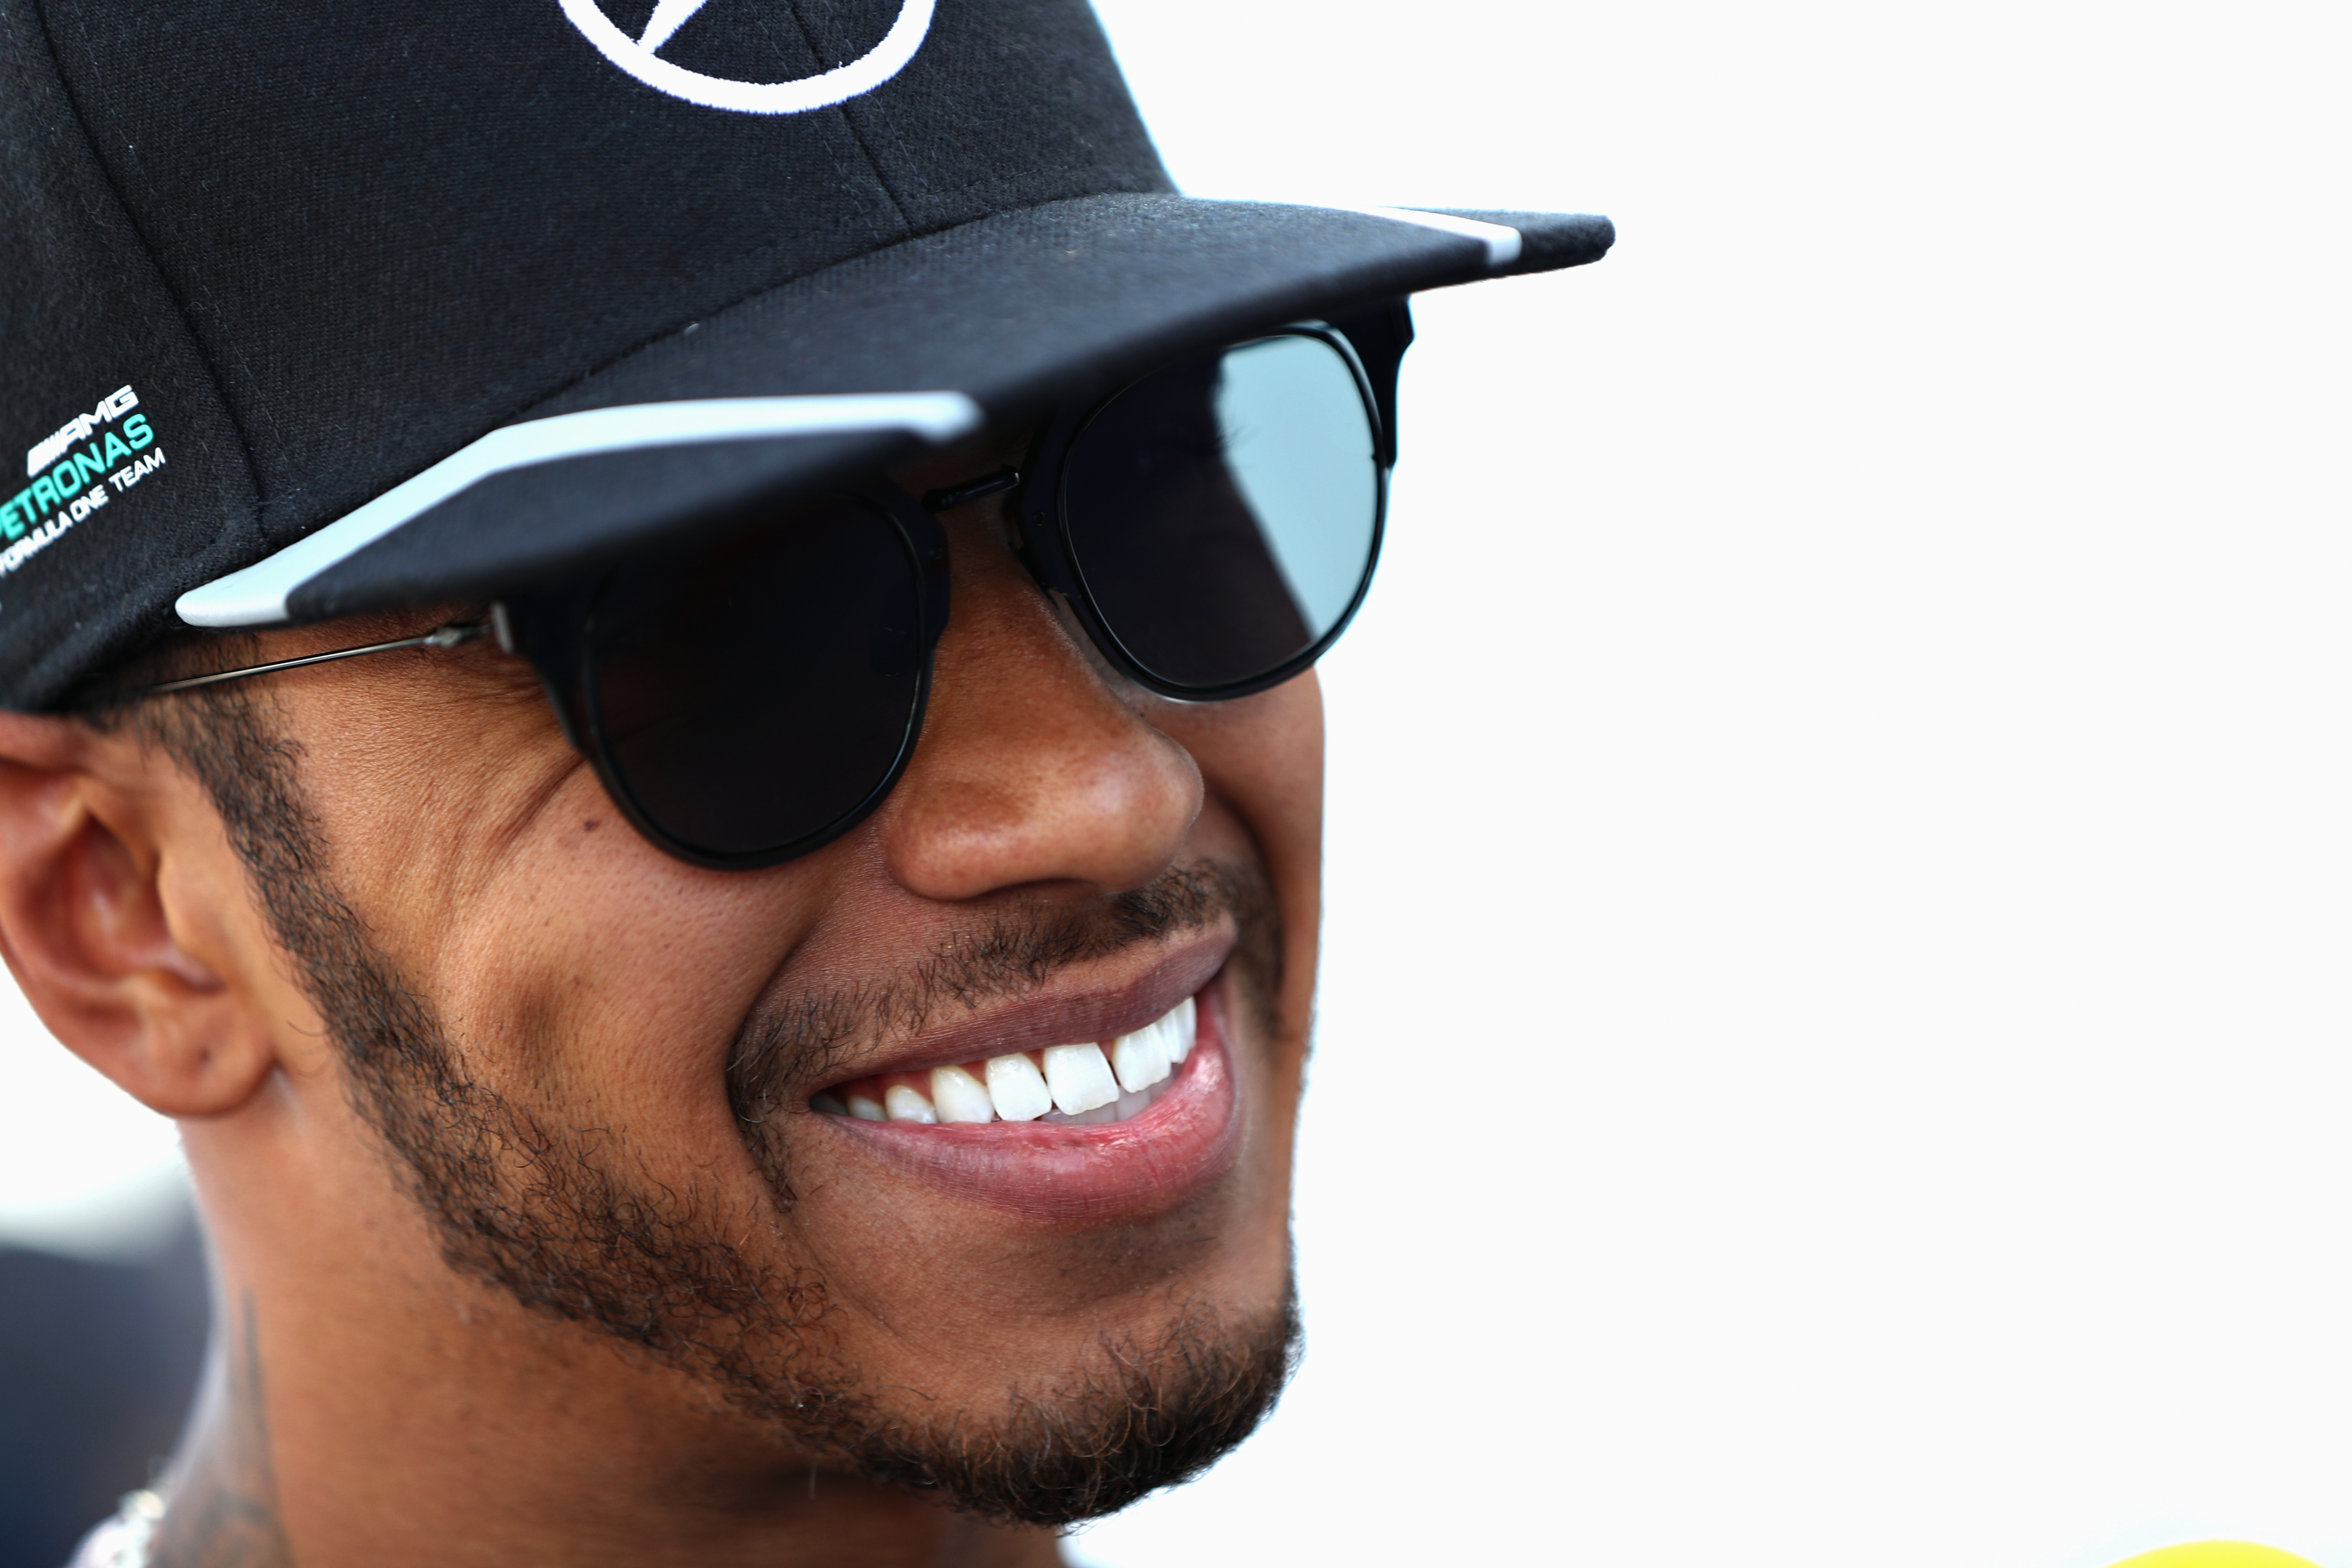 MONTREAL, QC - JUNE 10: Lewis Hamilton of Great Britain and Mercedes GP in the Paddock during practice for the Canadian Formula One Grand Prix at Circuit Gilles Villeneuve on June 9, 2016 in Montreal, Canada.   Mark Thompson/Getty Images/AFP